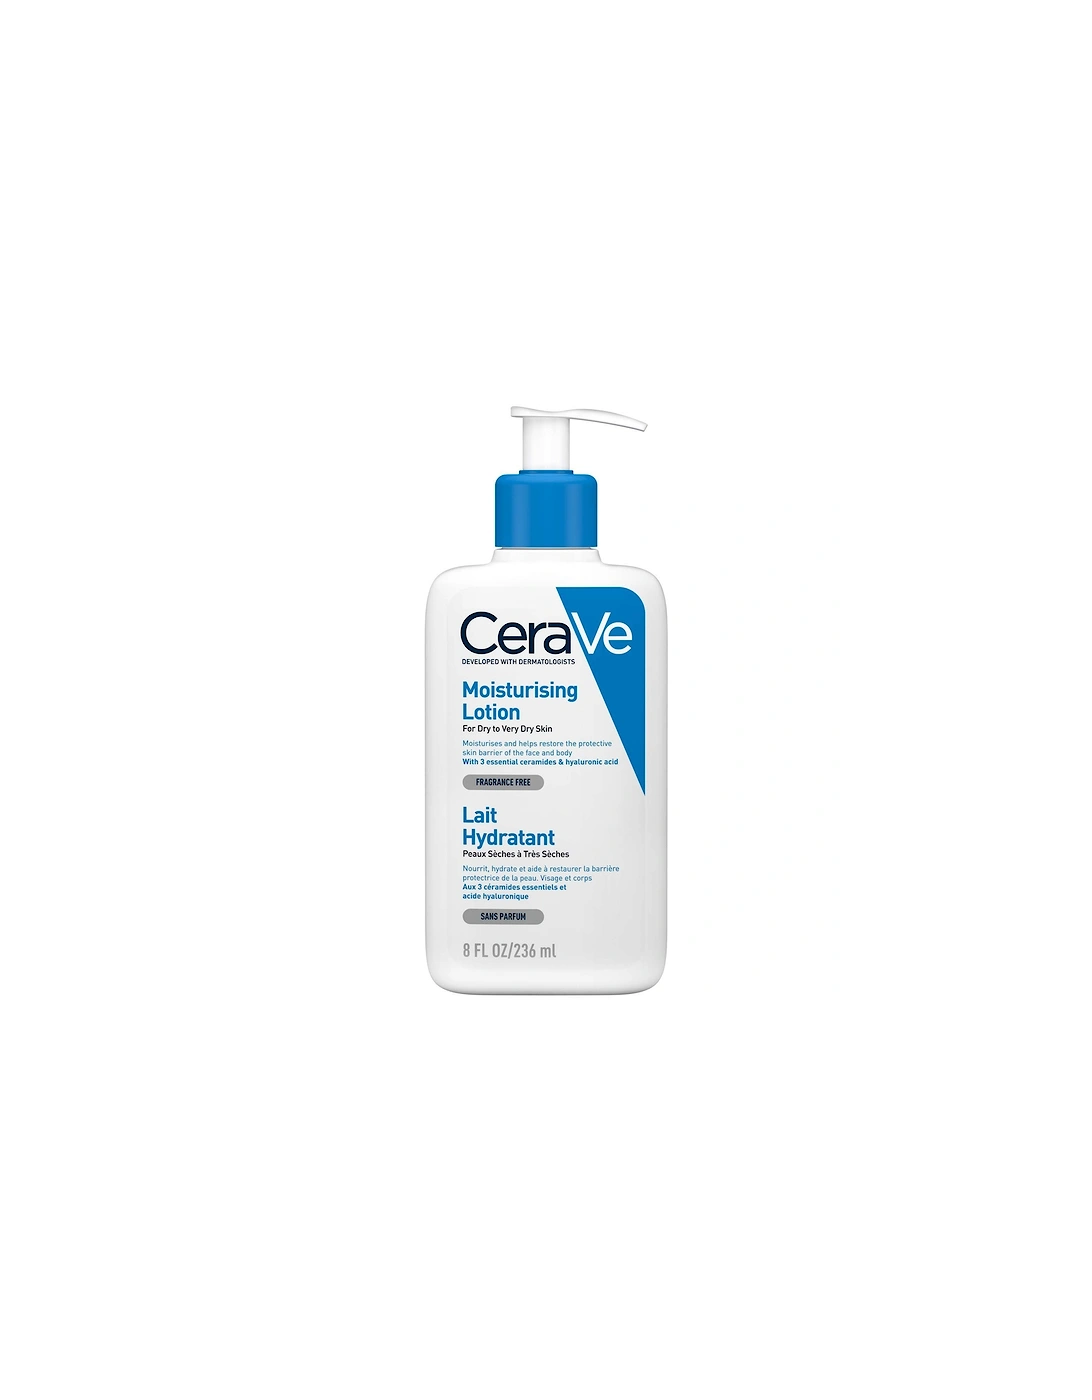 Moisturising Lotion with Ceramides for Dry to Very Dry Skin 236ml - CeraVe, 2 of 1